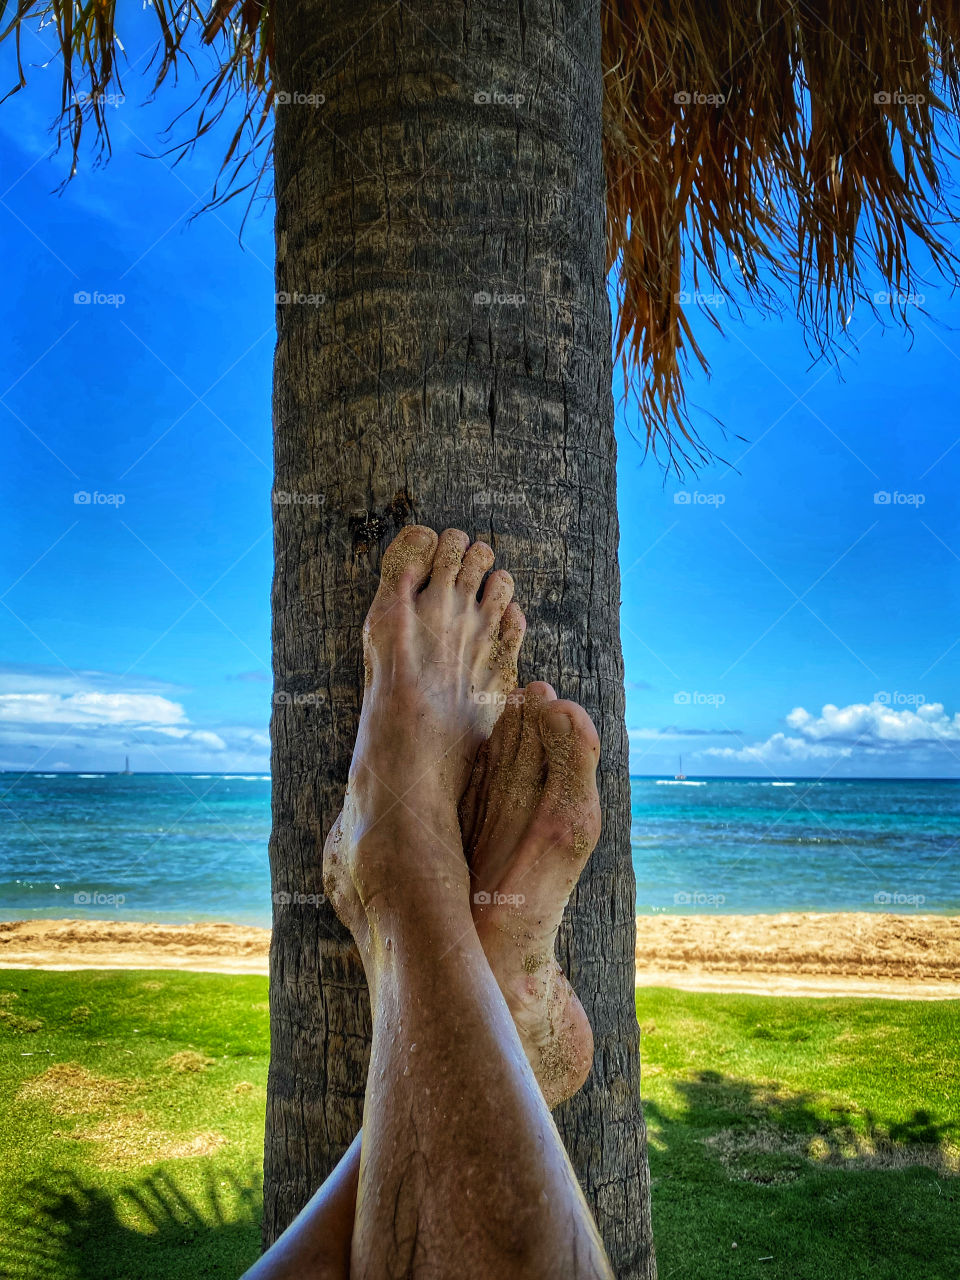 Sandy feet propped up on the trunk of a palm tree at the beach